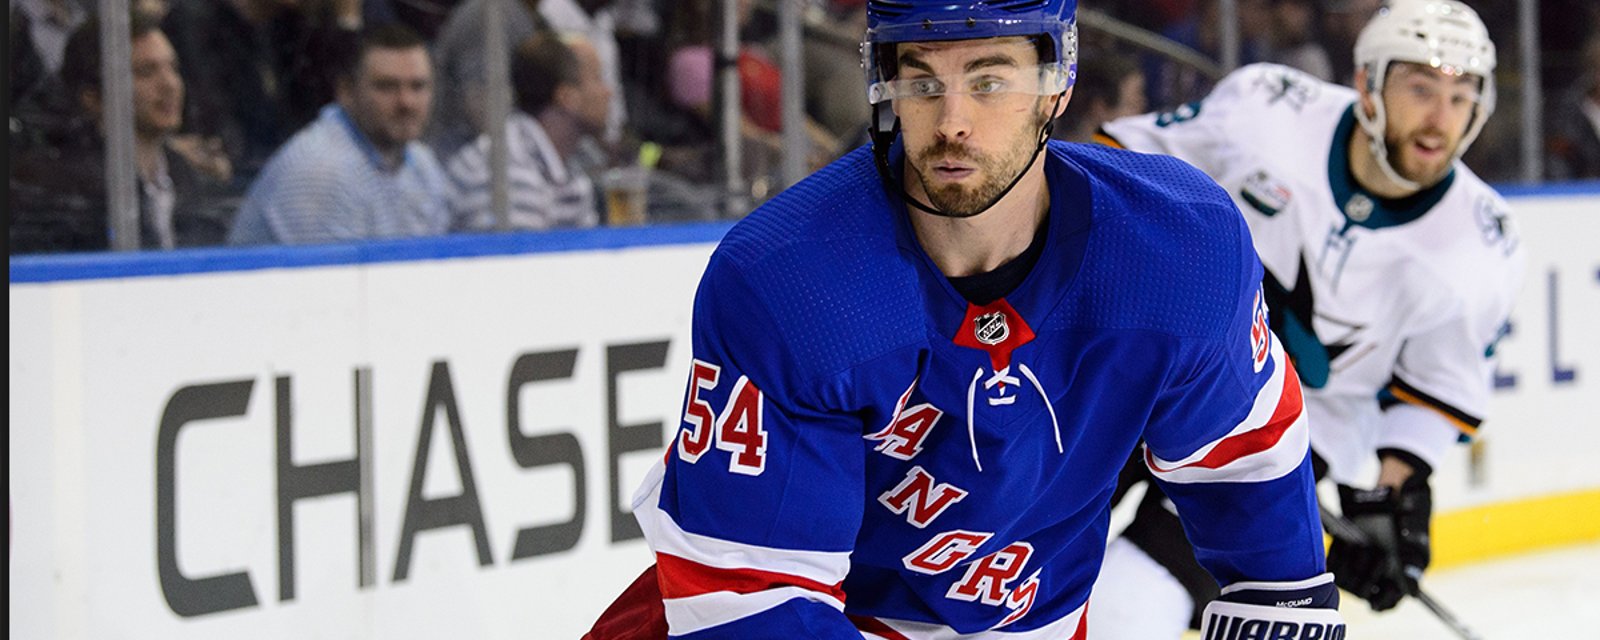 Breaking: Rangers pull McQuaid off the ice in the middle of game against Wild